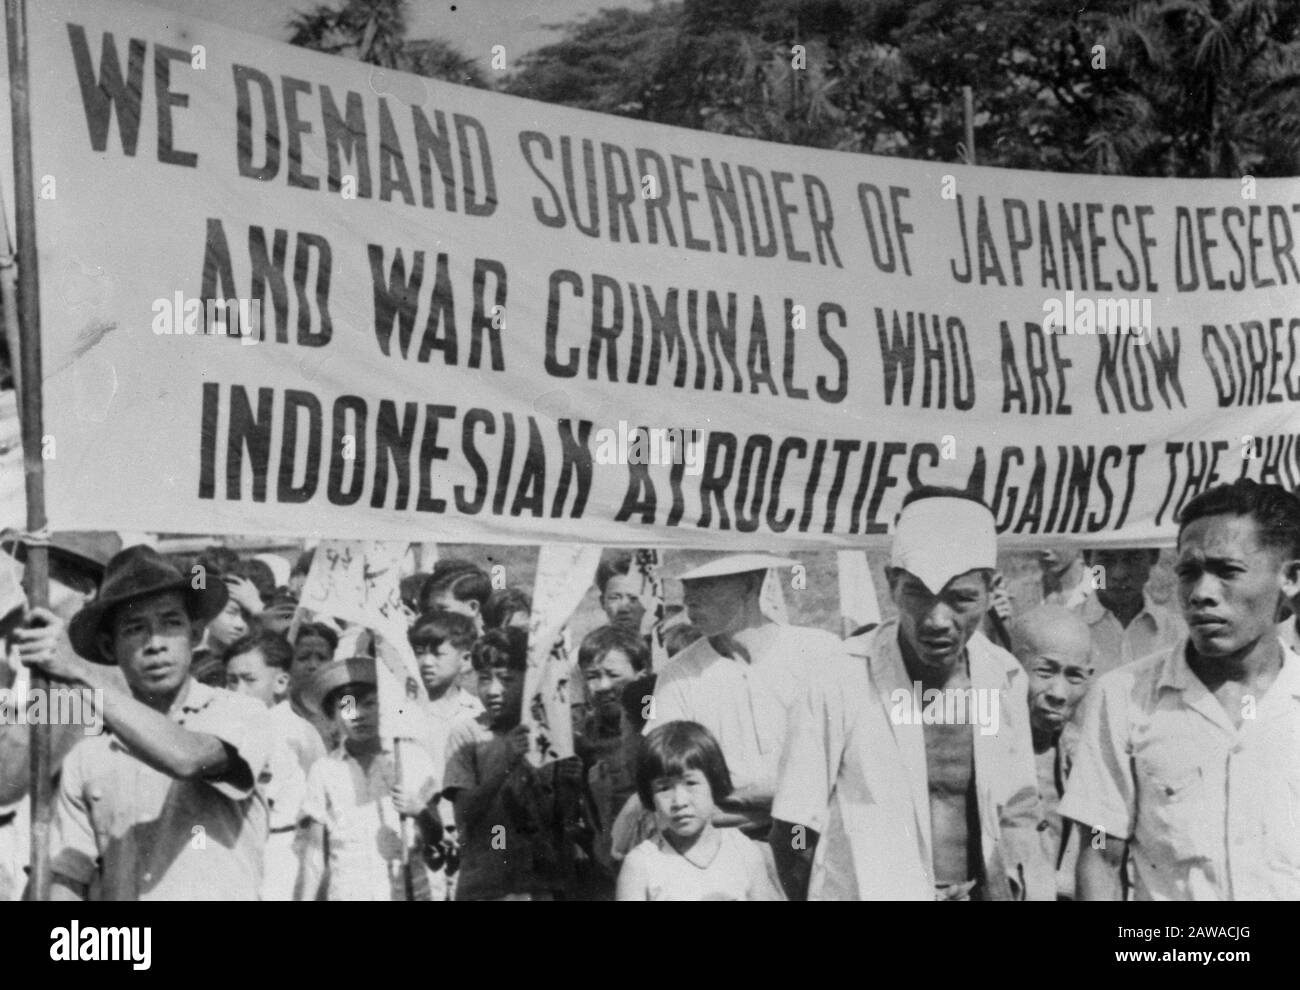 Anti-Republican demonstration Medan (reproductions)  Medan: a two kilometer procession, consisting of twelve Chinese held in Medan on September 4 a protest demonstration against the violence perpetrated by the Republic. 'We demand the extradition of Japanese deserters and war criminals who now have a guiding hand in the atrocities committed by Indonesians against Chinese' Date: September 4, 1947 Location: Indonesia, Medan, Dutch East Indies, Sumatra Stock Photo